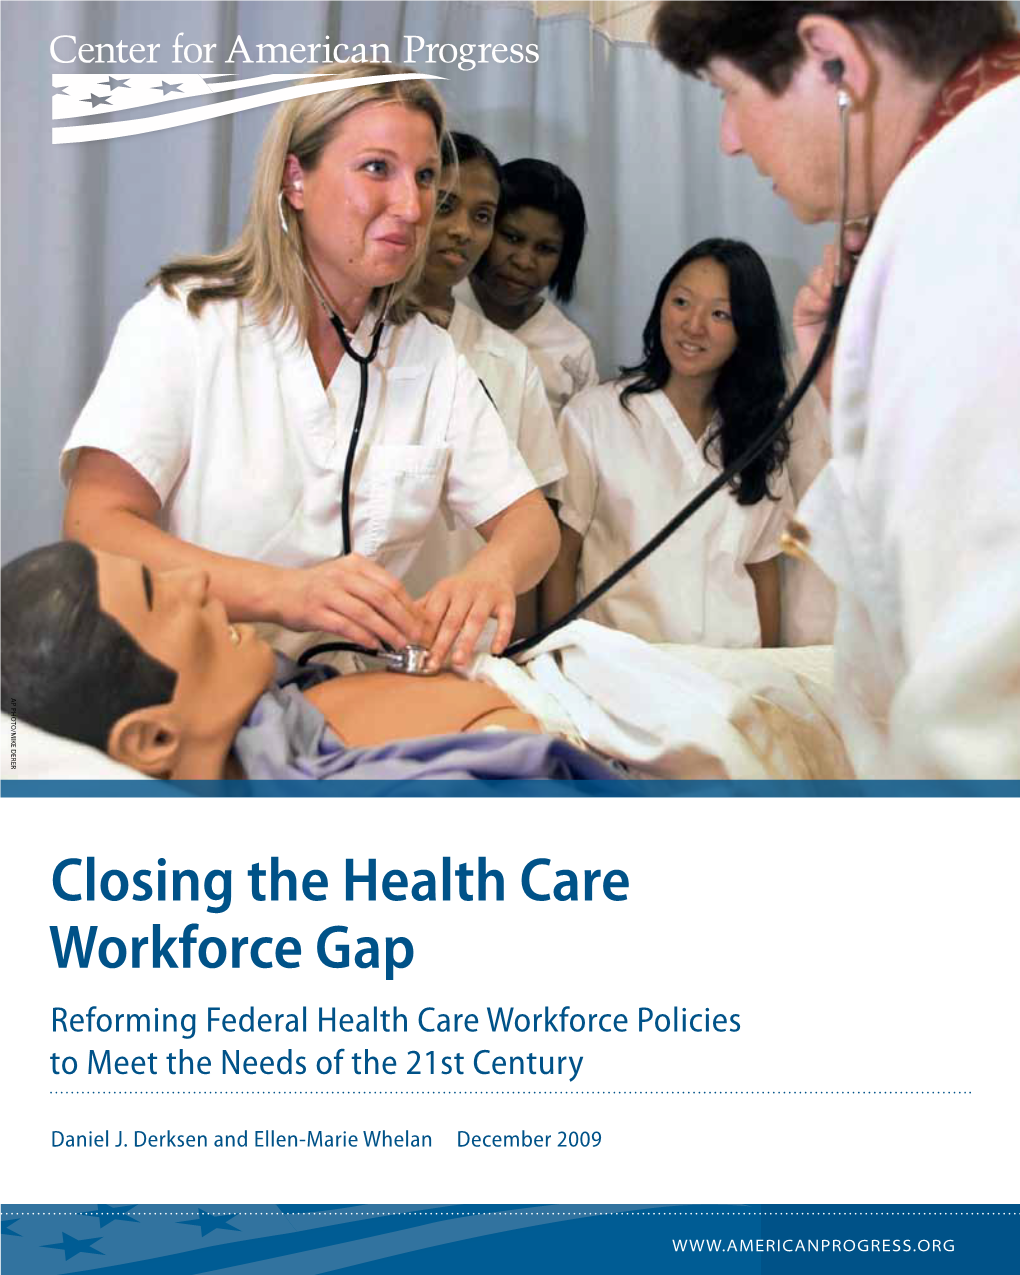 Closing the Health Care Workforce Gap Reforming Federal Health Care Workforce Policies to Meet the Needs of the 21St Century